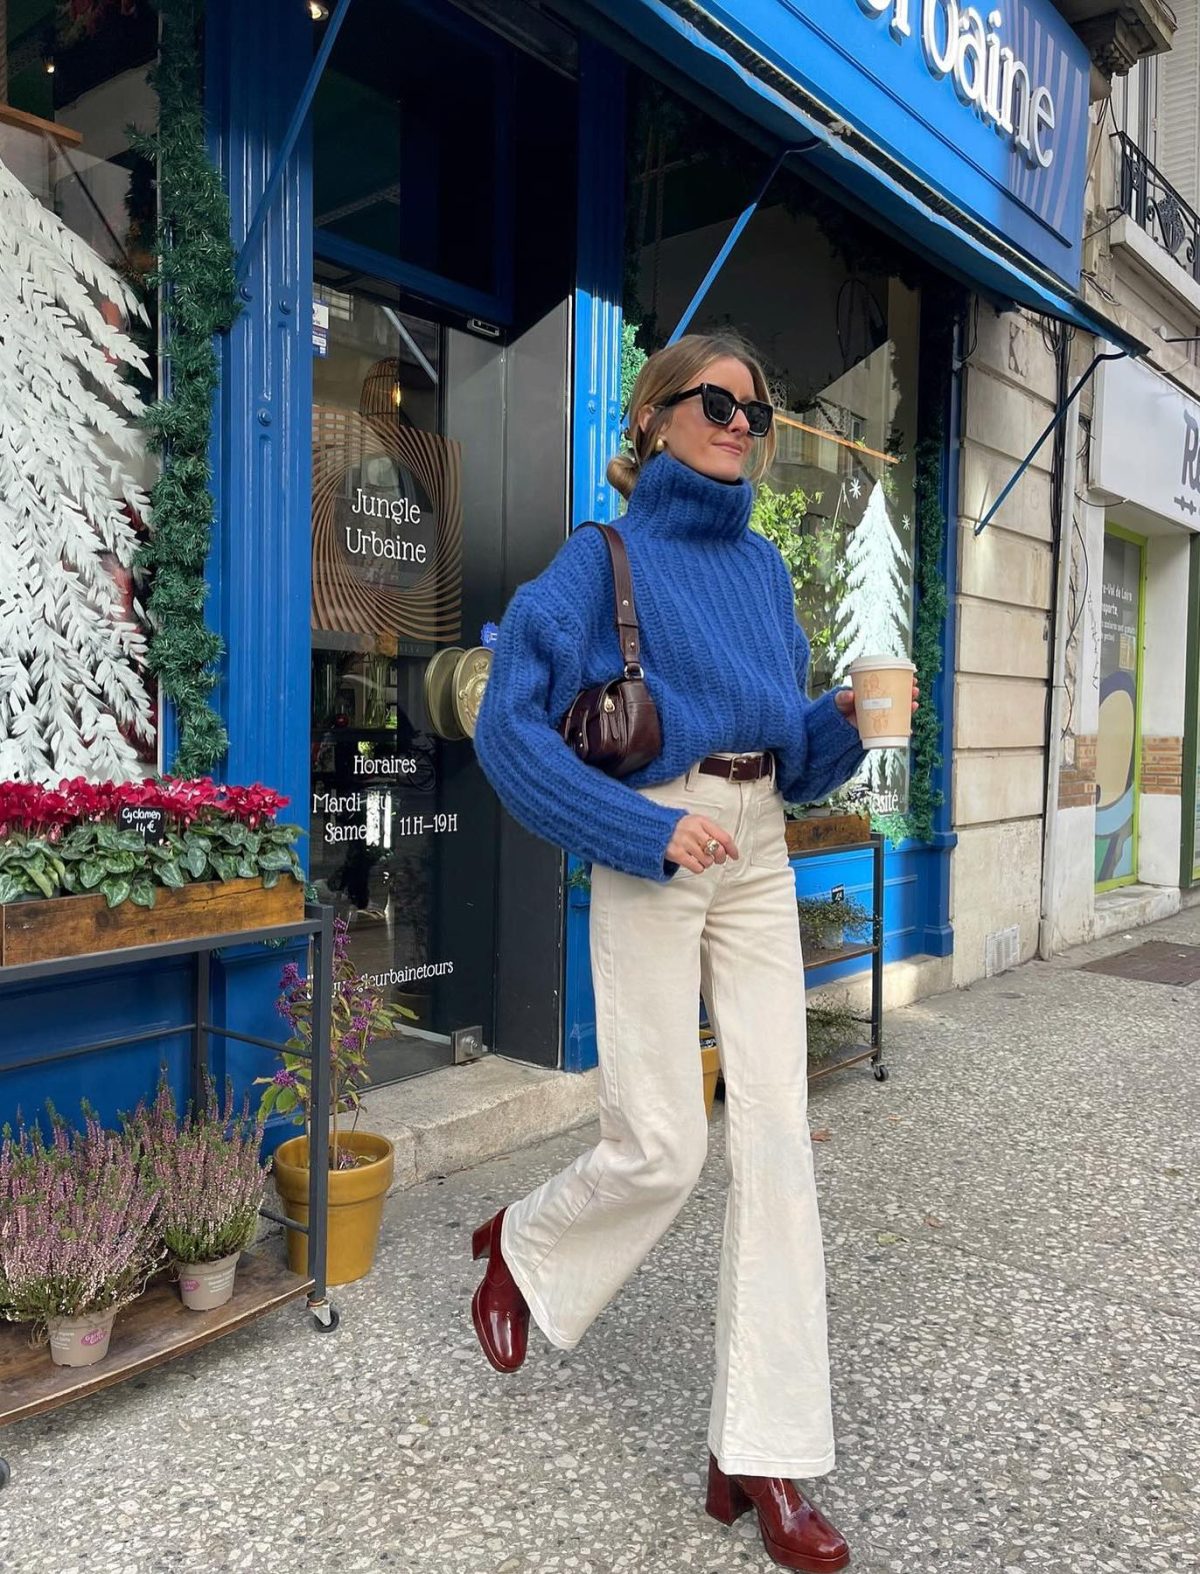 Cream-colored flare jeans witha blue sweater and brown boots.